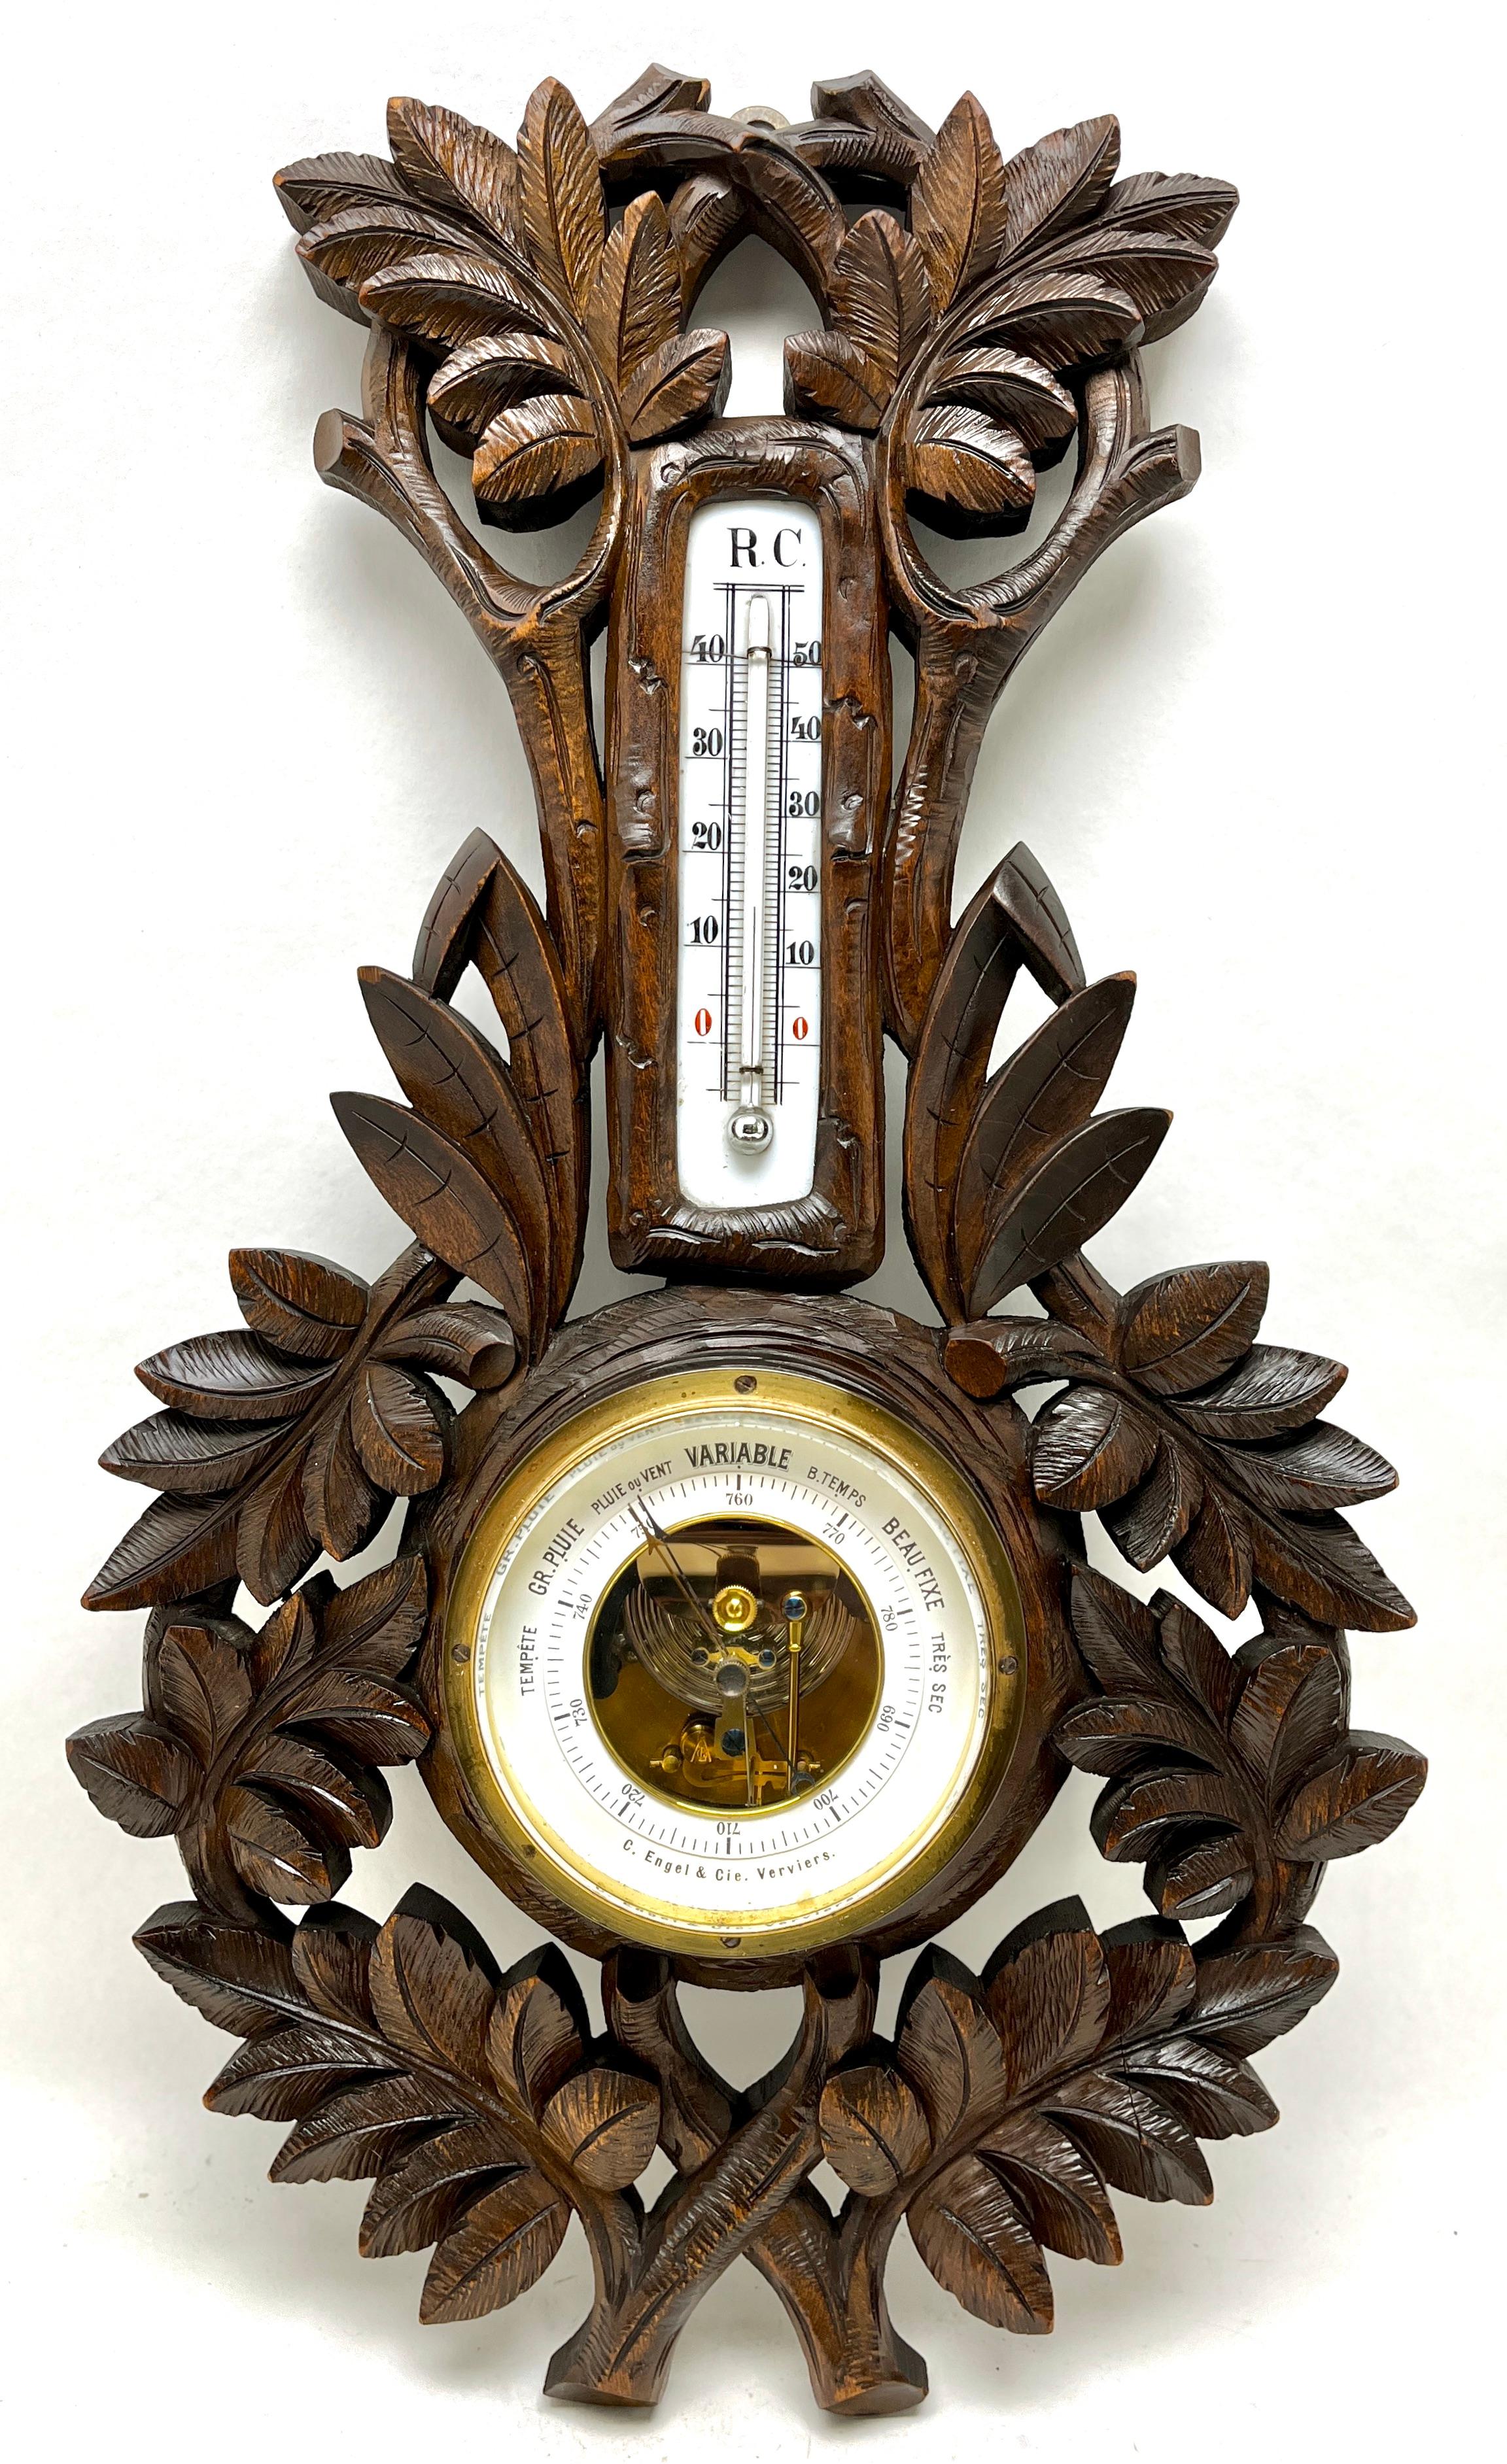 Carved wooden C.Engel & Cie antique Belgium Barometer with Thermometer, 1910s

Unusual antique carved wooden barometer in a lovely carved case, working order.

With best Wishes, Geert
